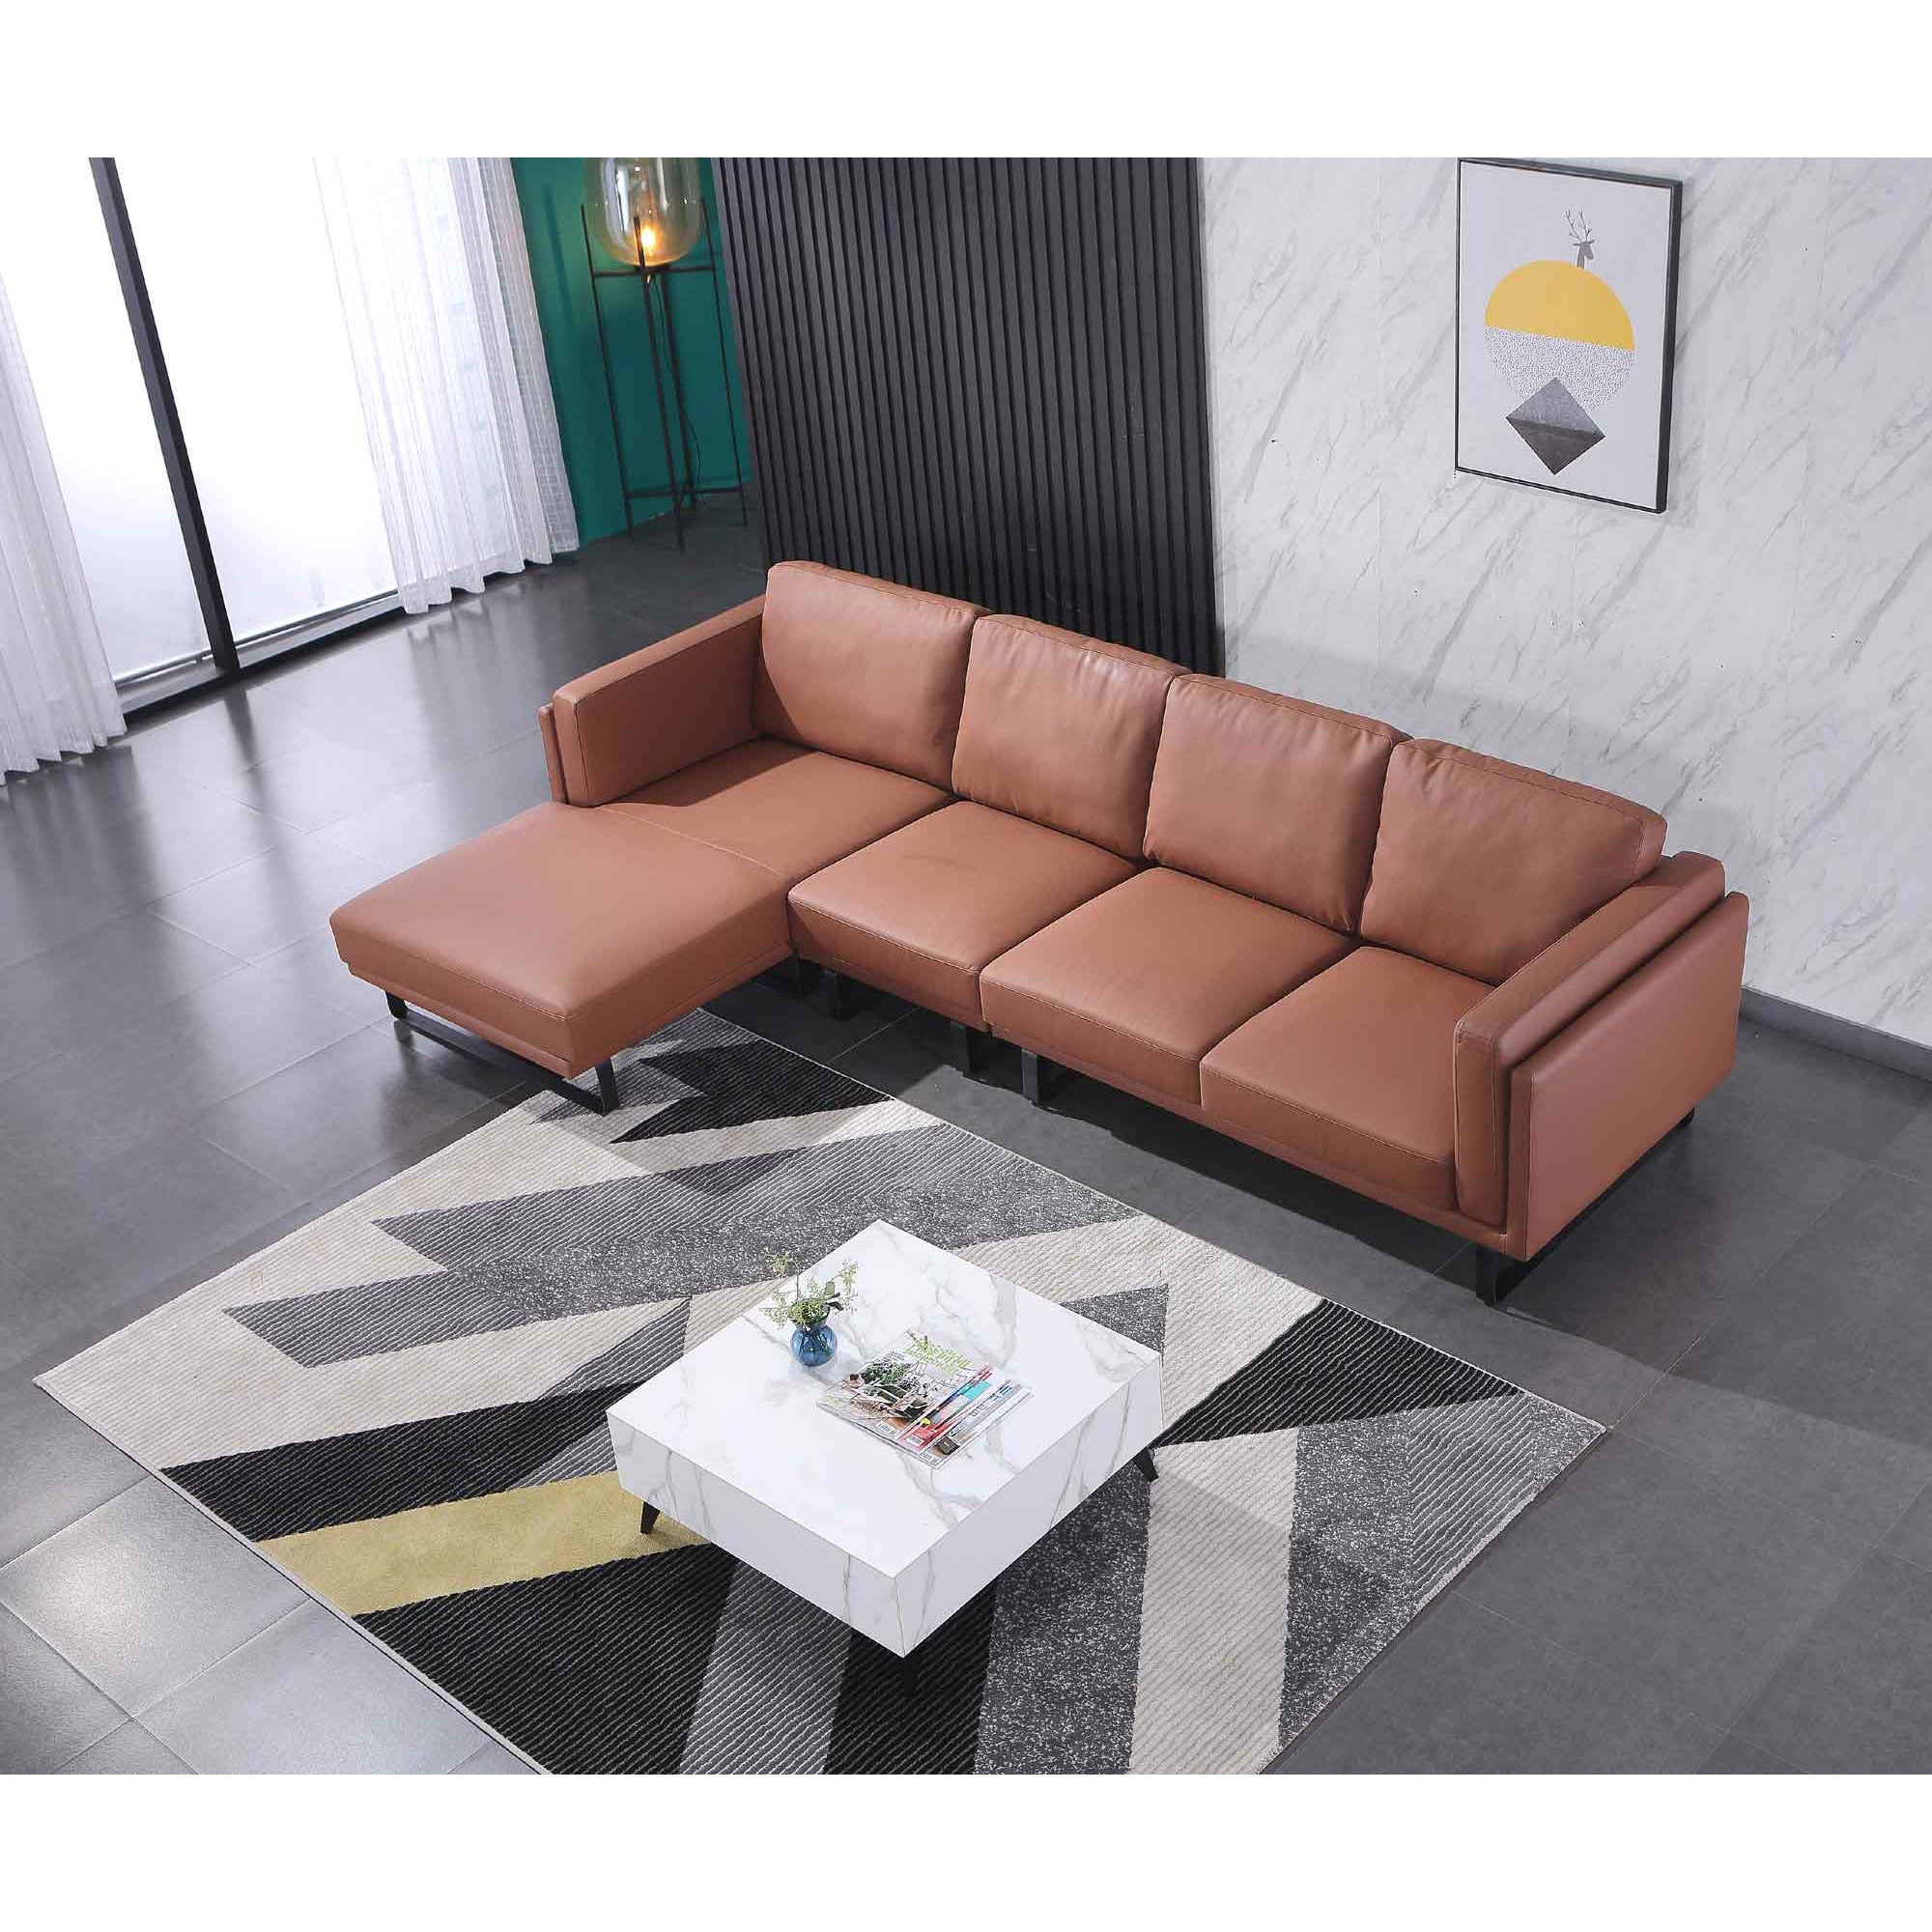 European Furniture - Fidelio Left Facing Sectional Russet Brown Italian Leather - EF-58665-2LHF - New Star Living